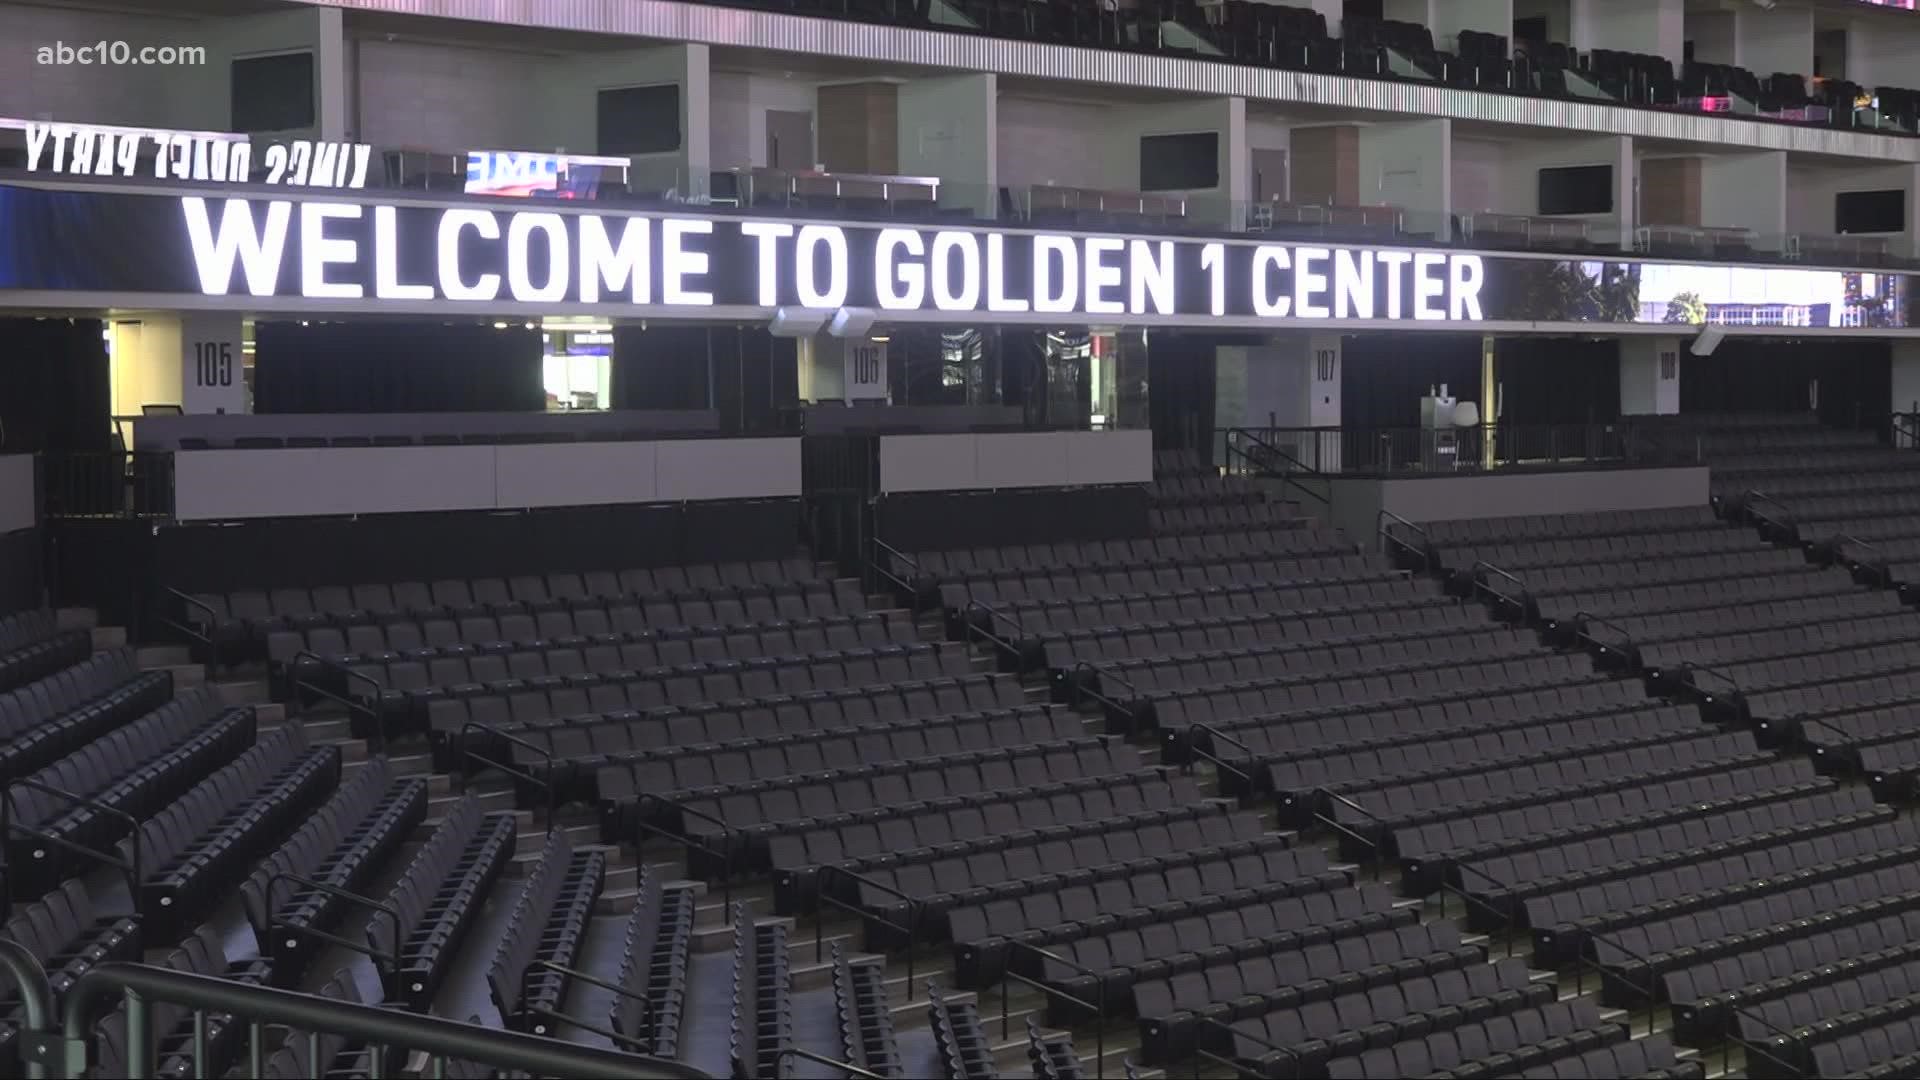 The Golden 1 Center is preparing for pre-pandemic crowds to return again. Unvaccinated fans are supposed to mask up.